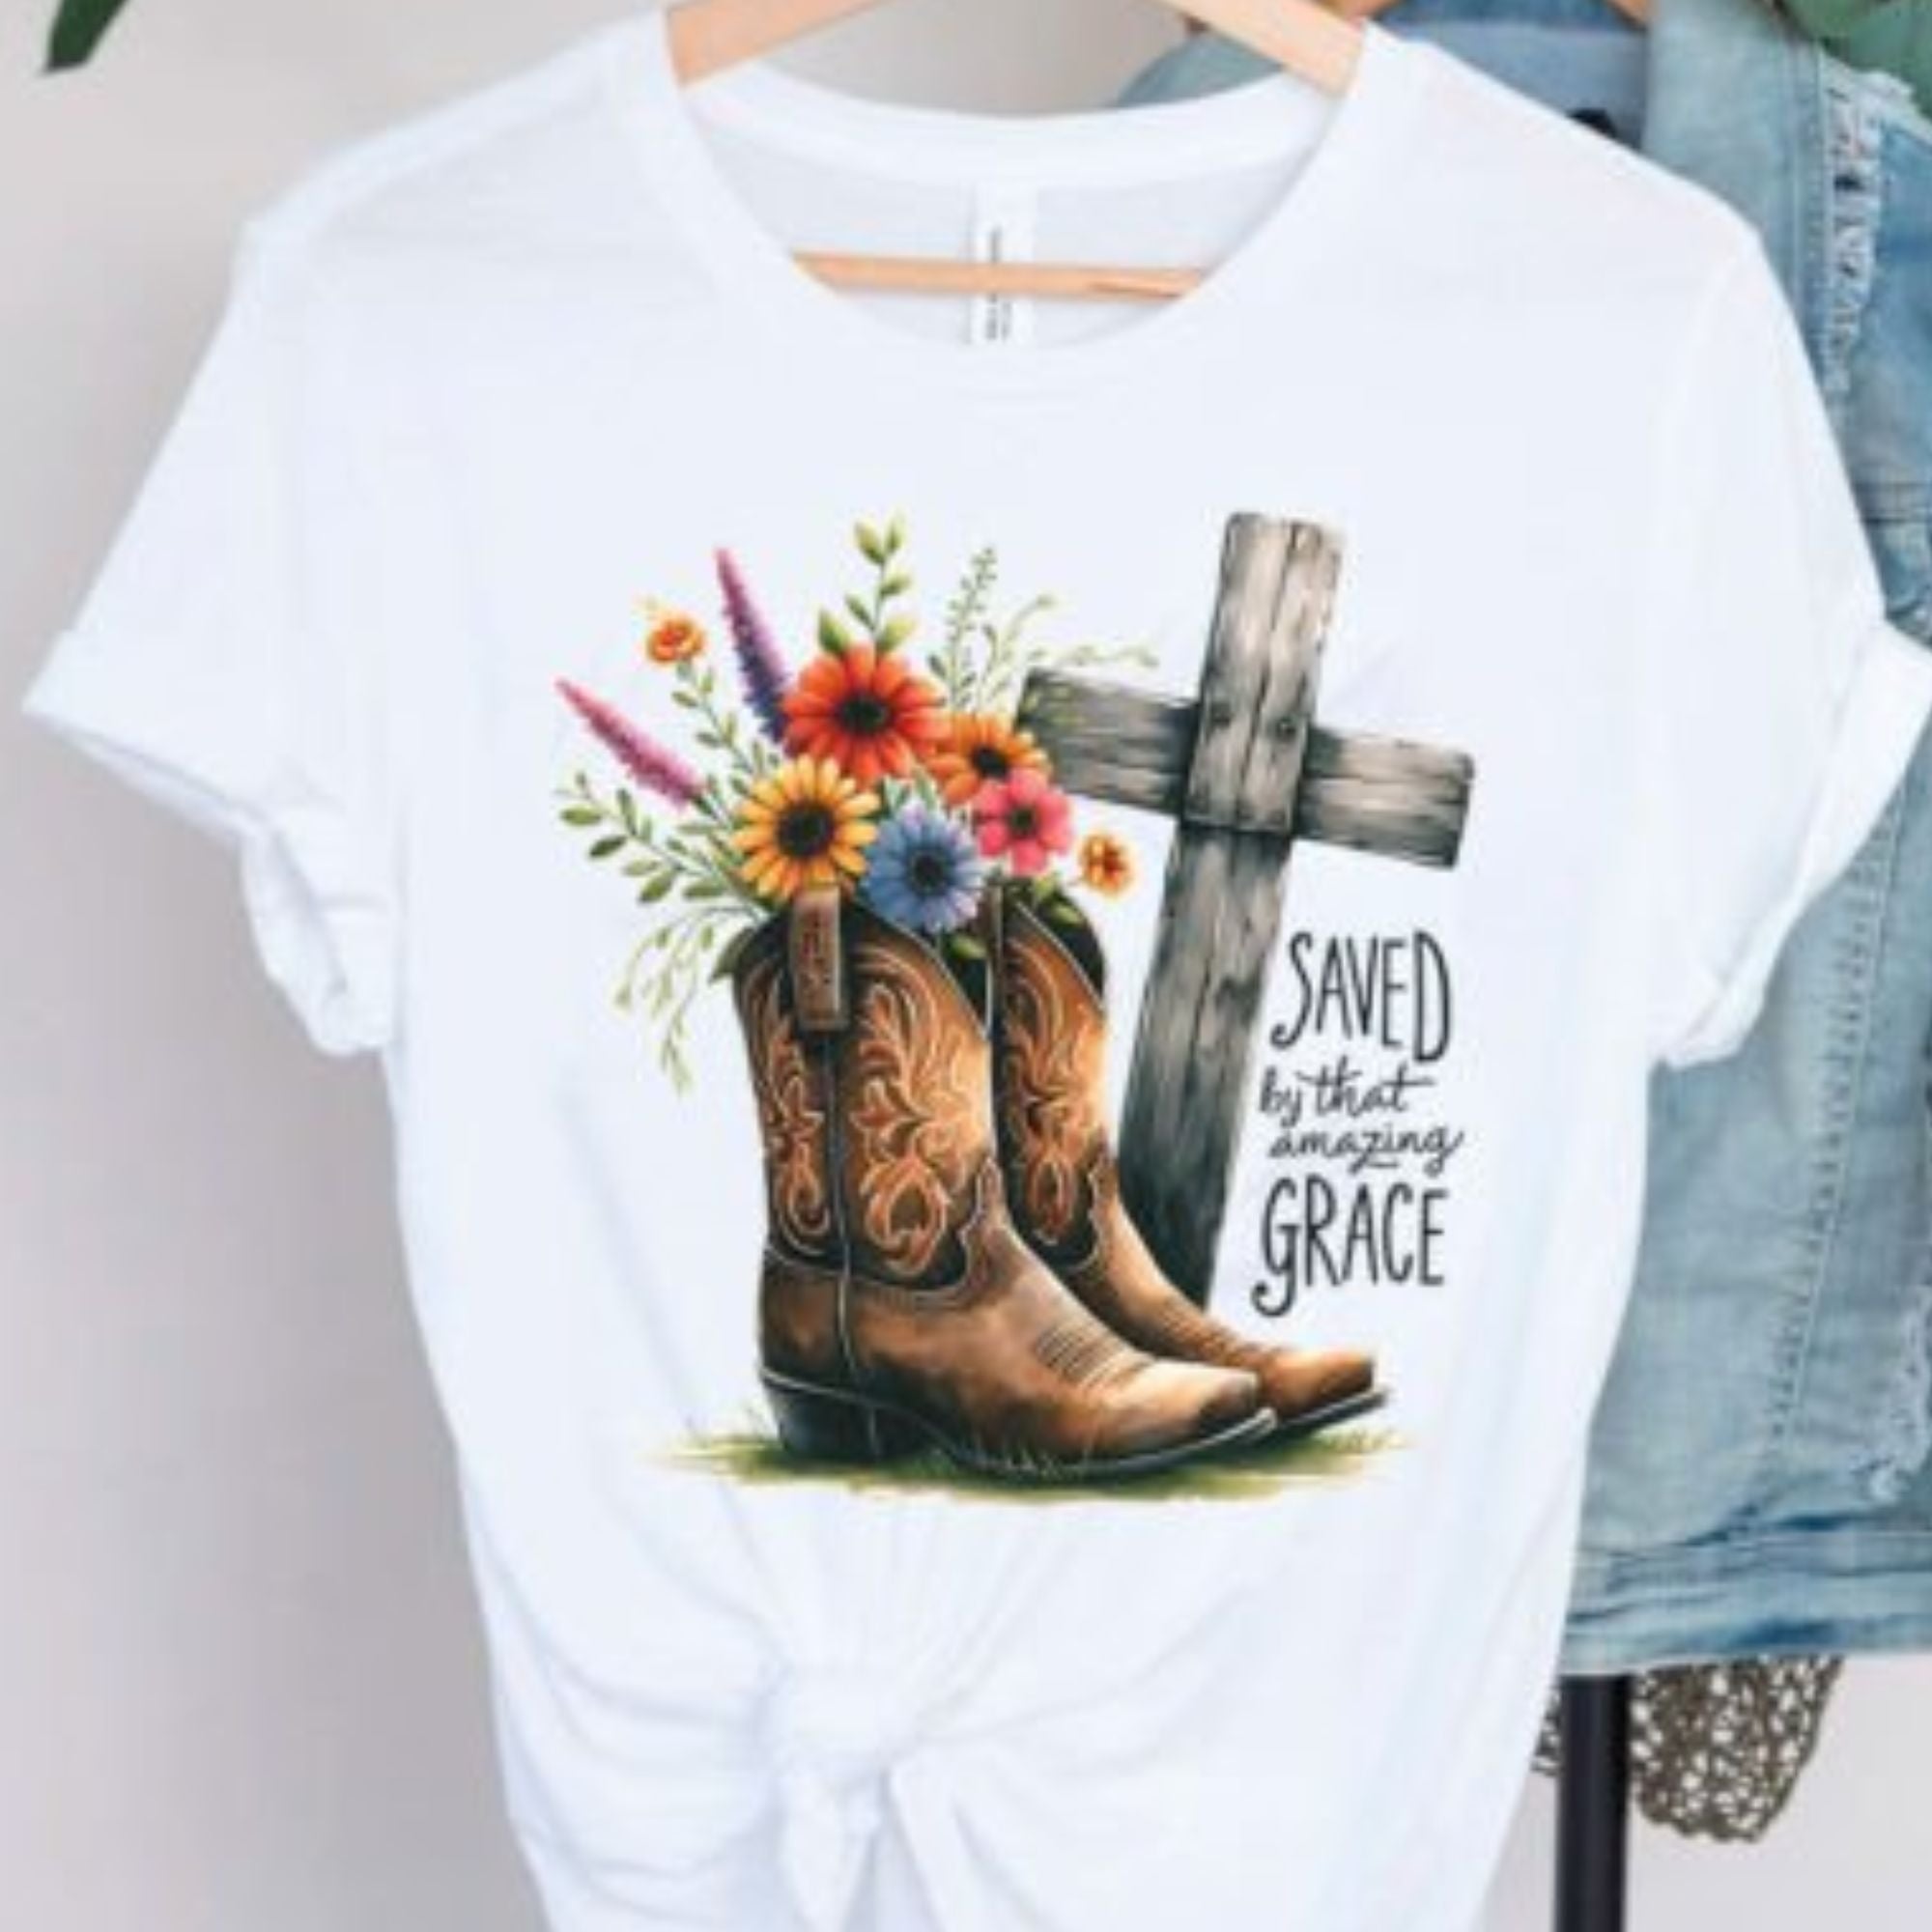 White cotton t-shirt with 'Saved by That Amazing Grace' saying and a design of flowers in cowboy boots next to an old wooden cross, available at Chivilla Bay.